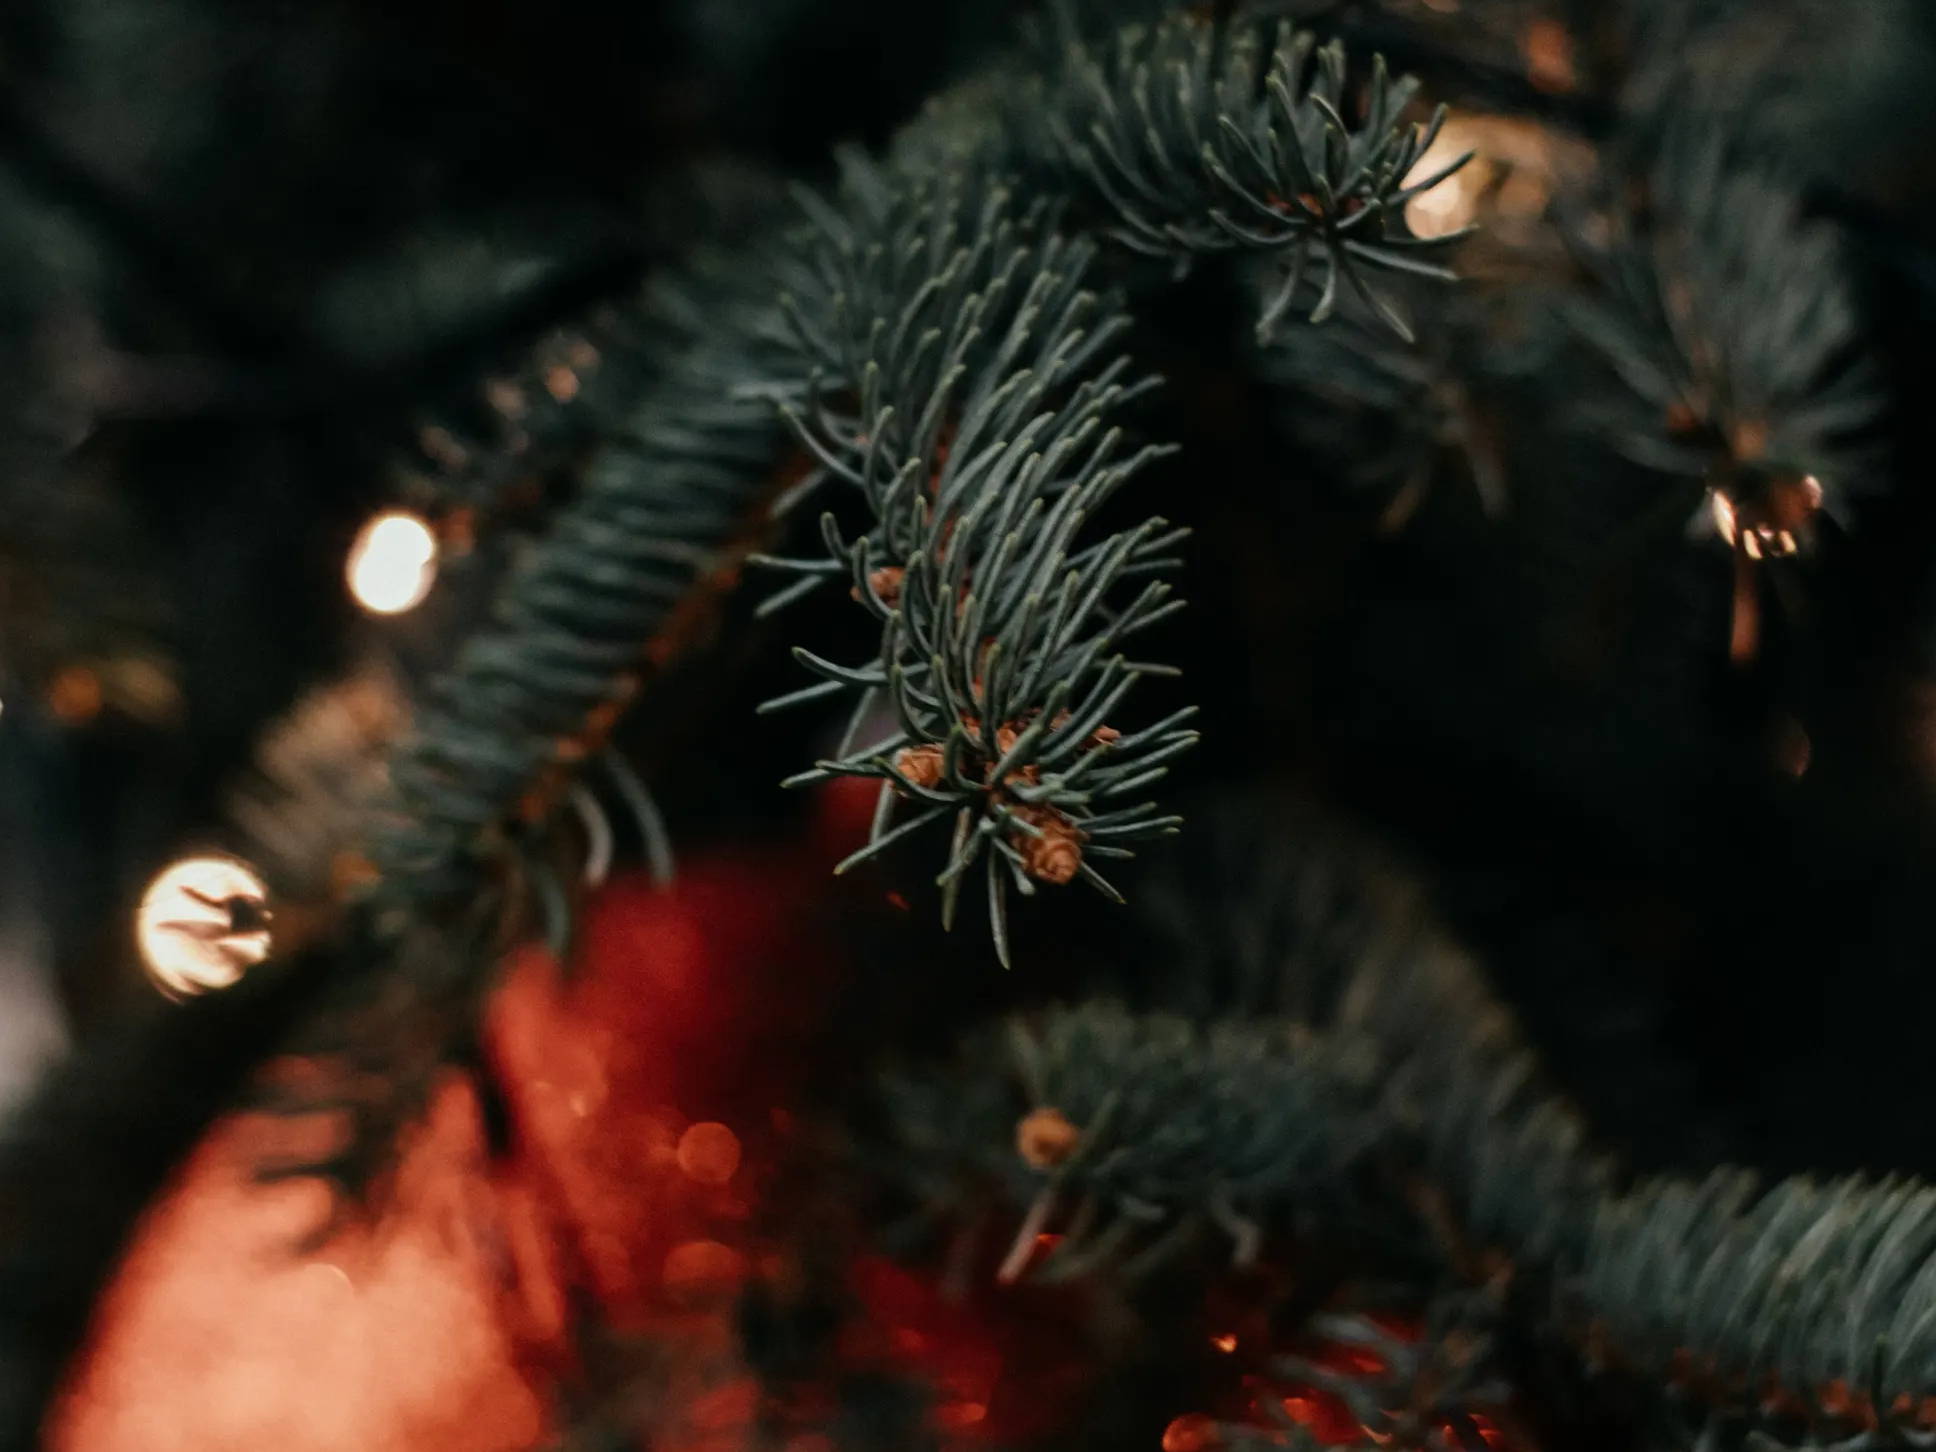 Close-up of an ornament in a Christmas tree